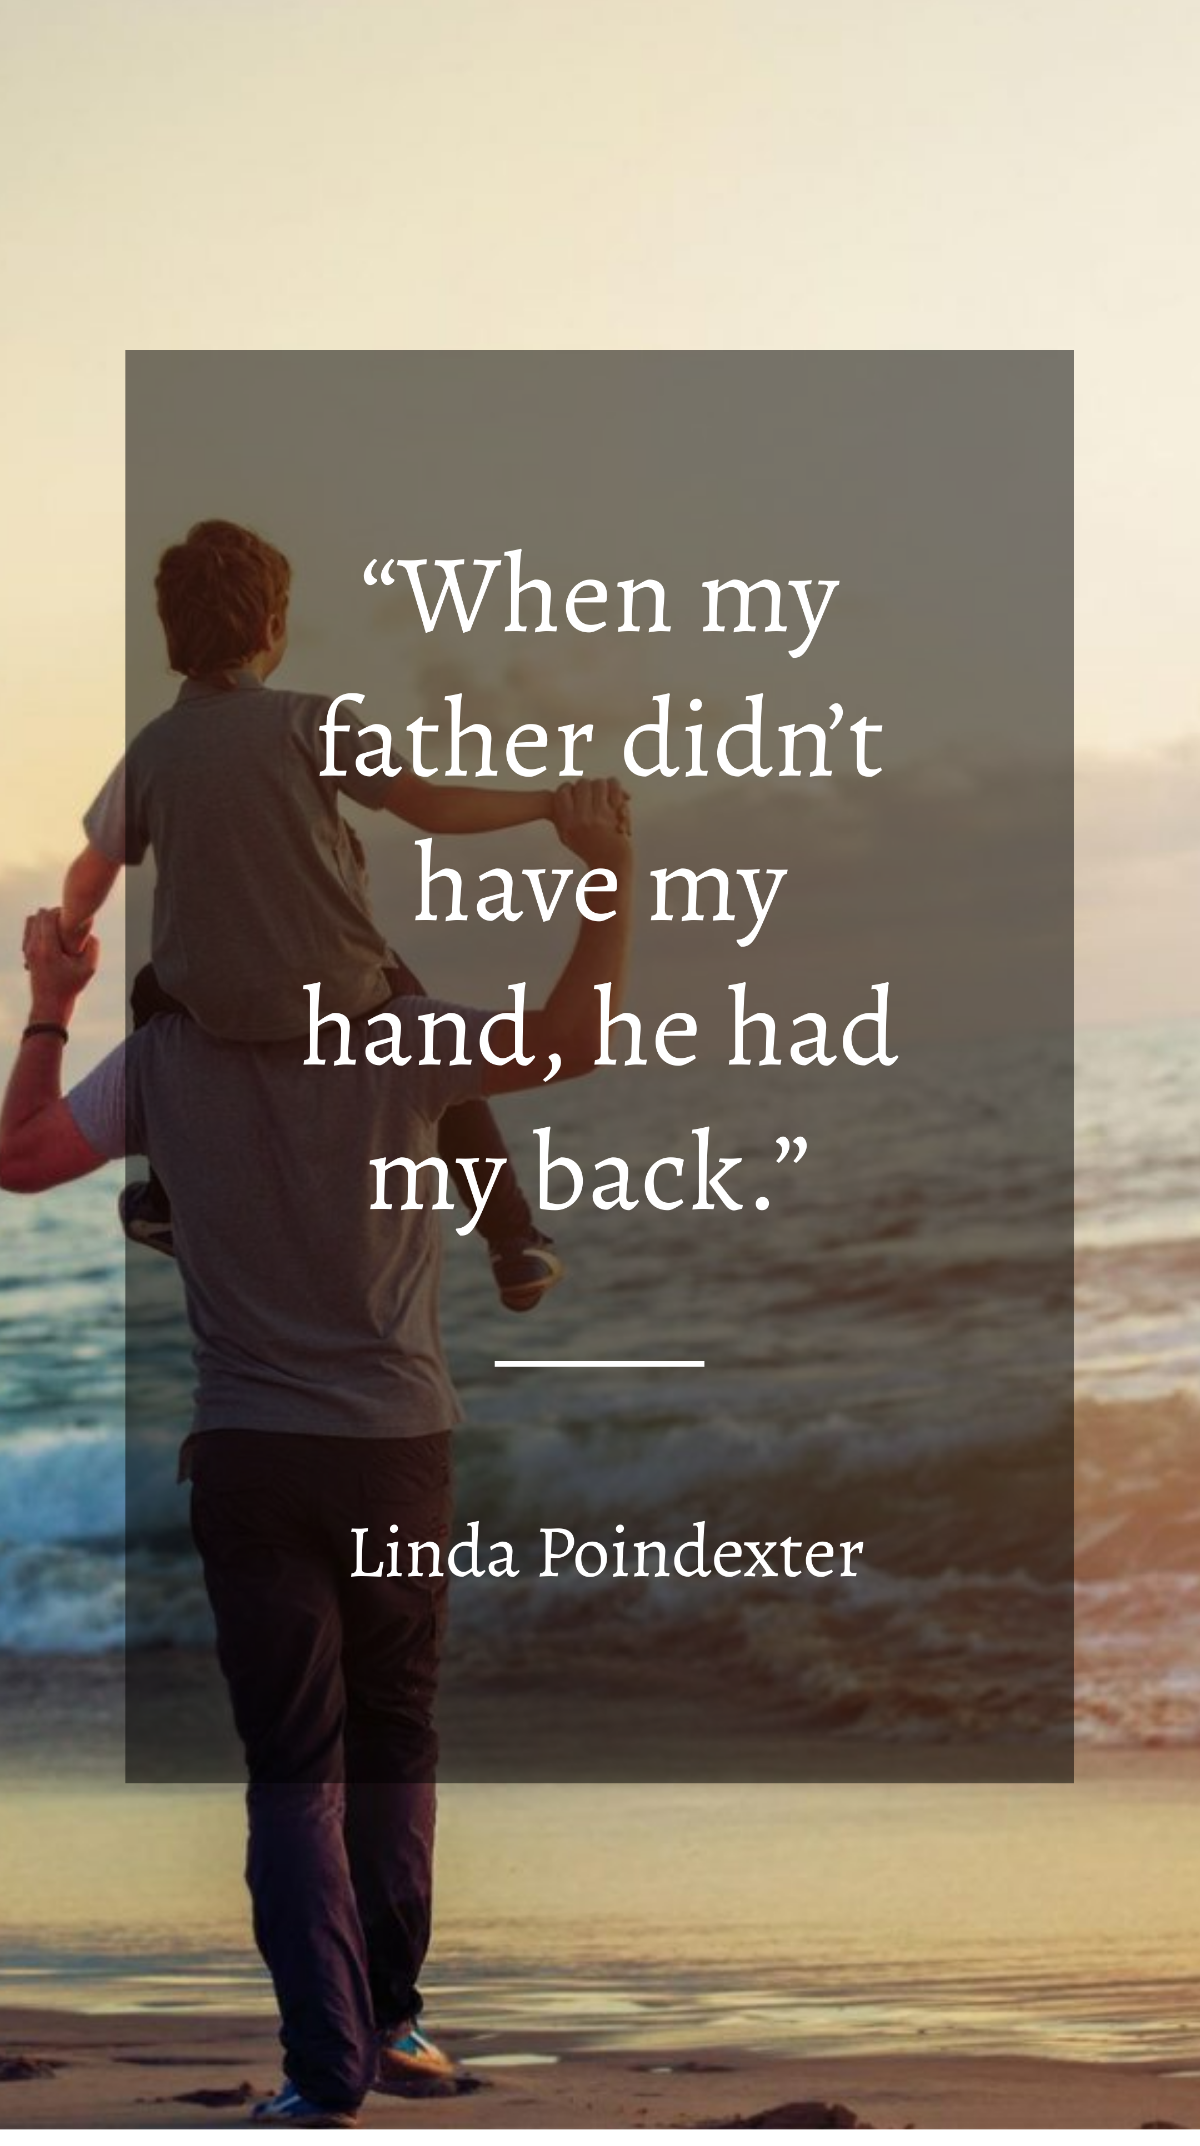 Linda Poindexter - When my father didn’t have my hand, he had my back. Template